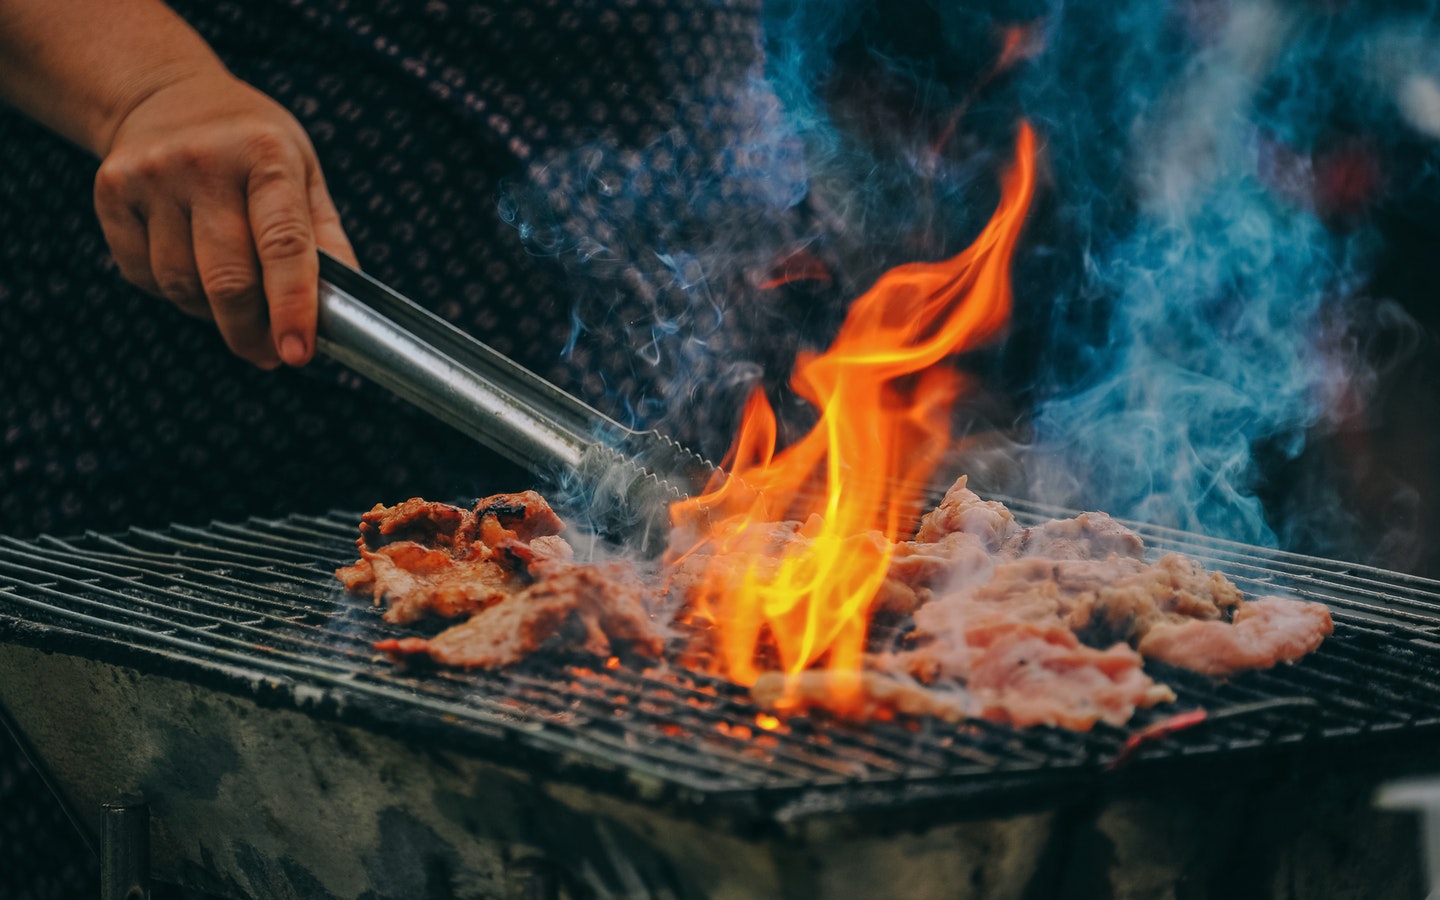 Checklist for Planning a BBQ Party at Home - Bproperty